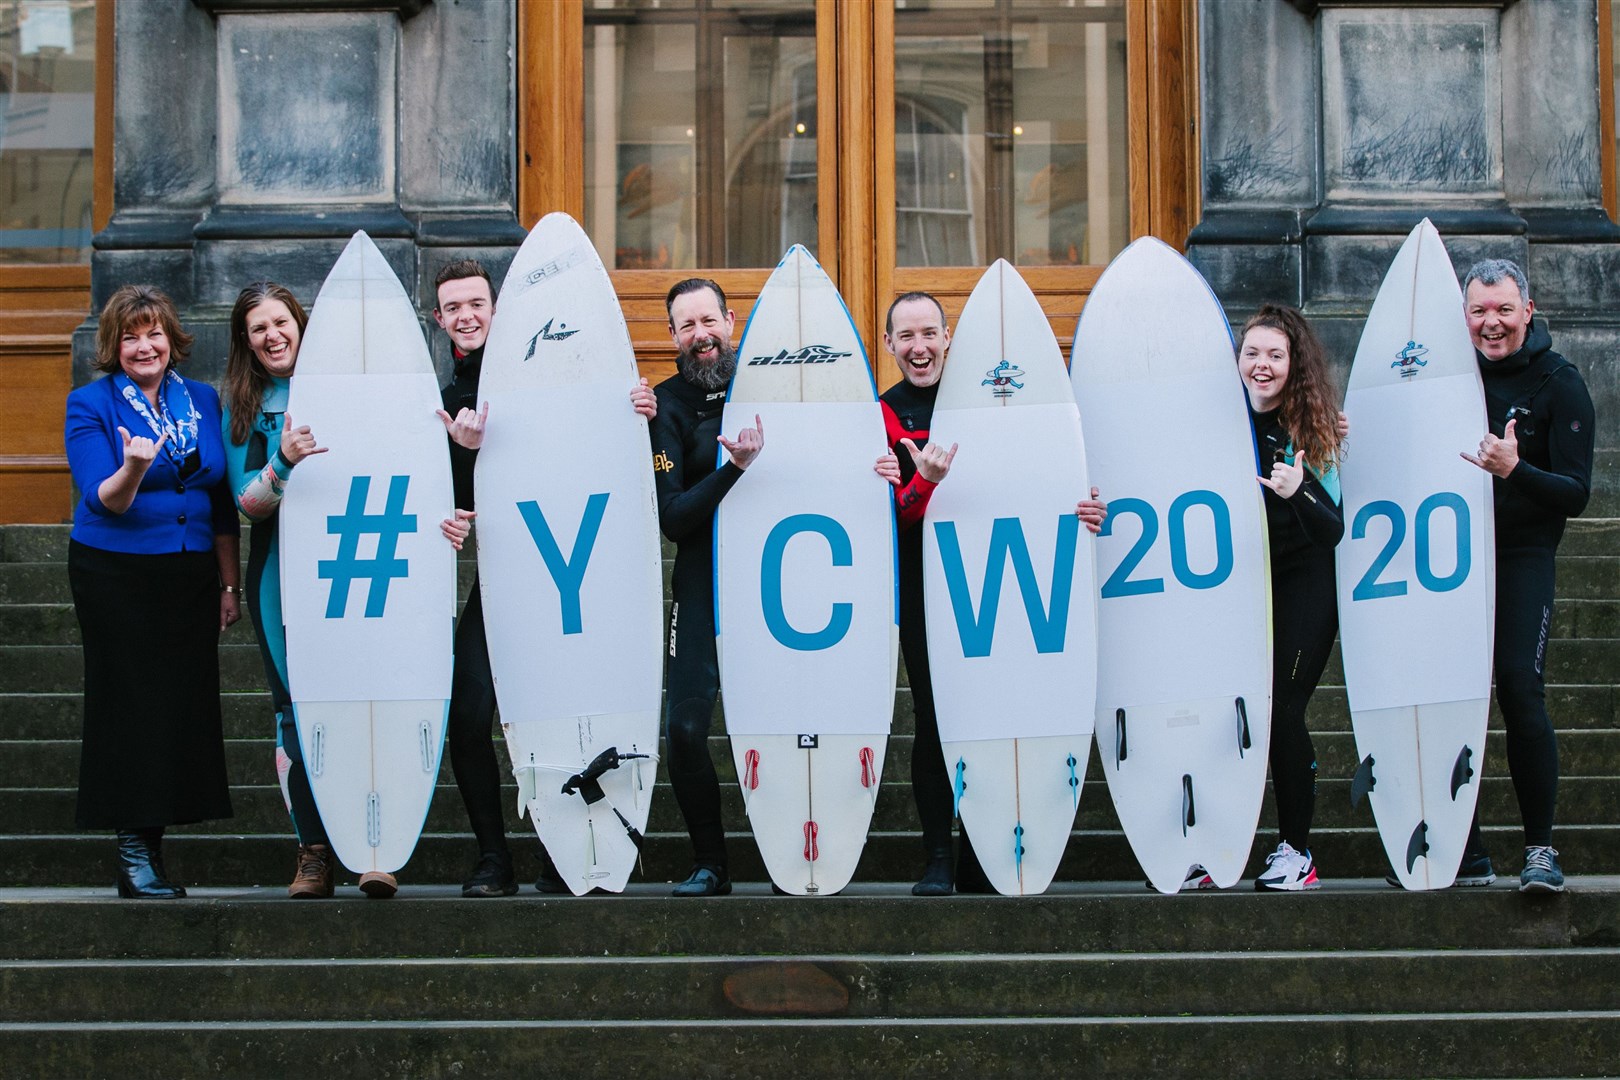 (From left) Fiona Hyslop unveil events for Scotland’s Year of Coasts and Waters 2020, with surfers Sally Harris, Owen McQueenie, Brian Allen, Sam Christopherson, Tamzin McQueenie and Martin McQueenie.